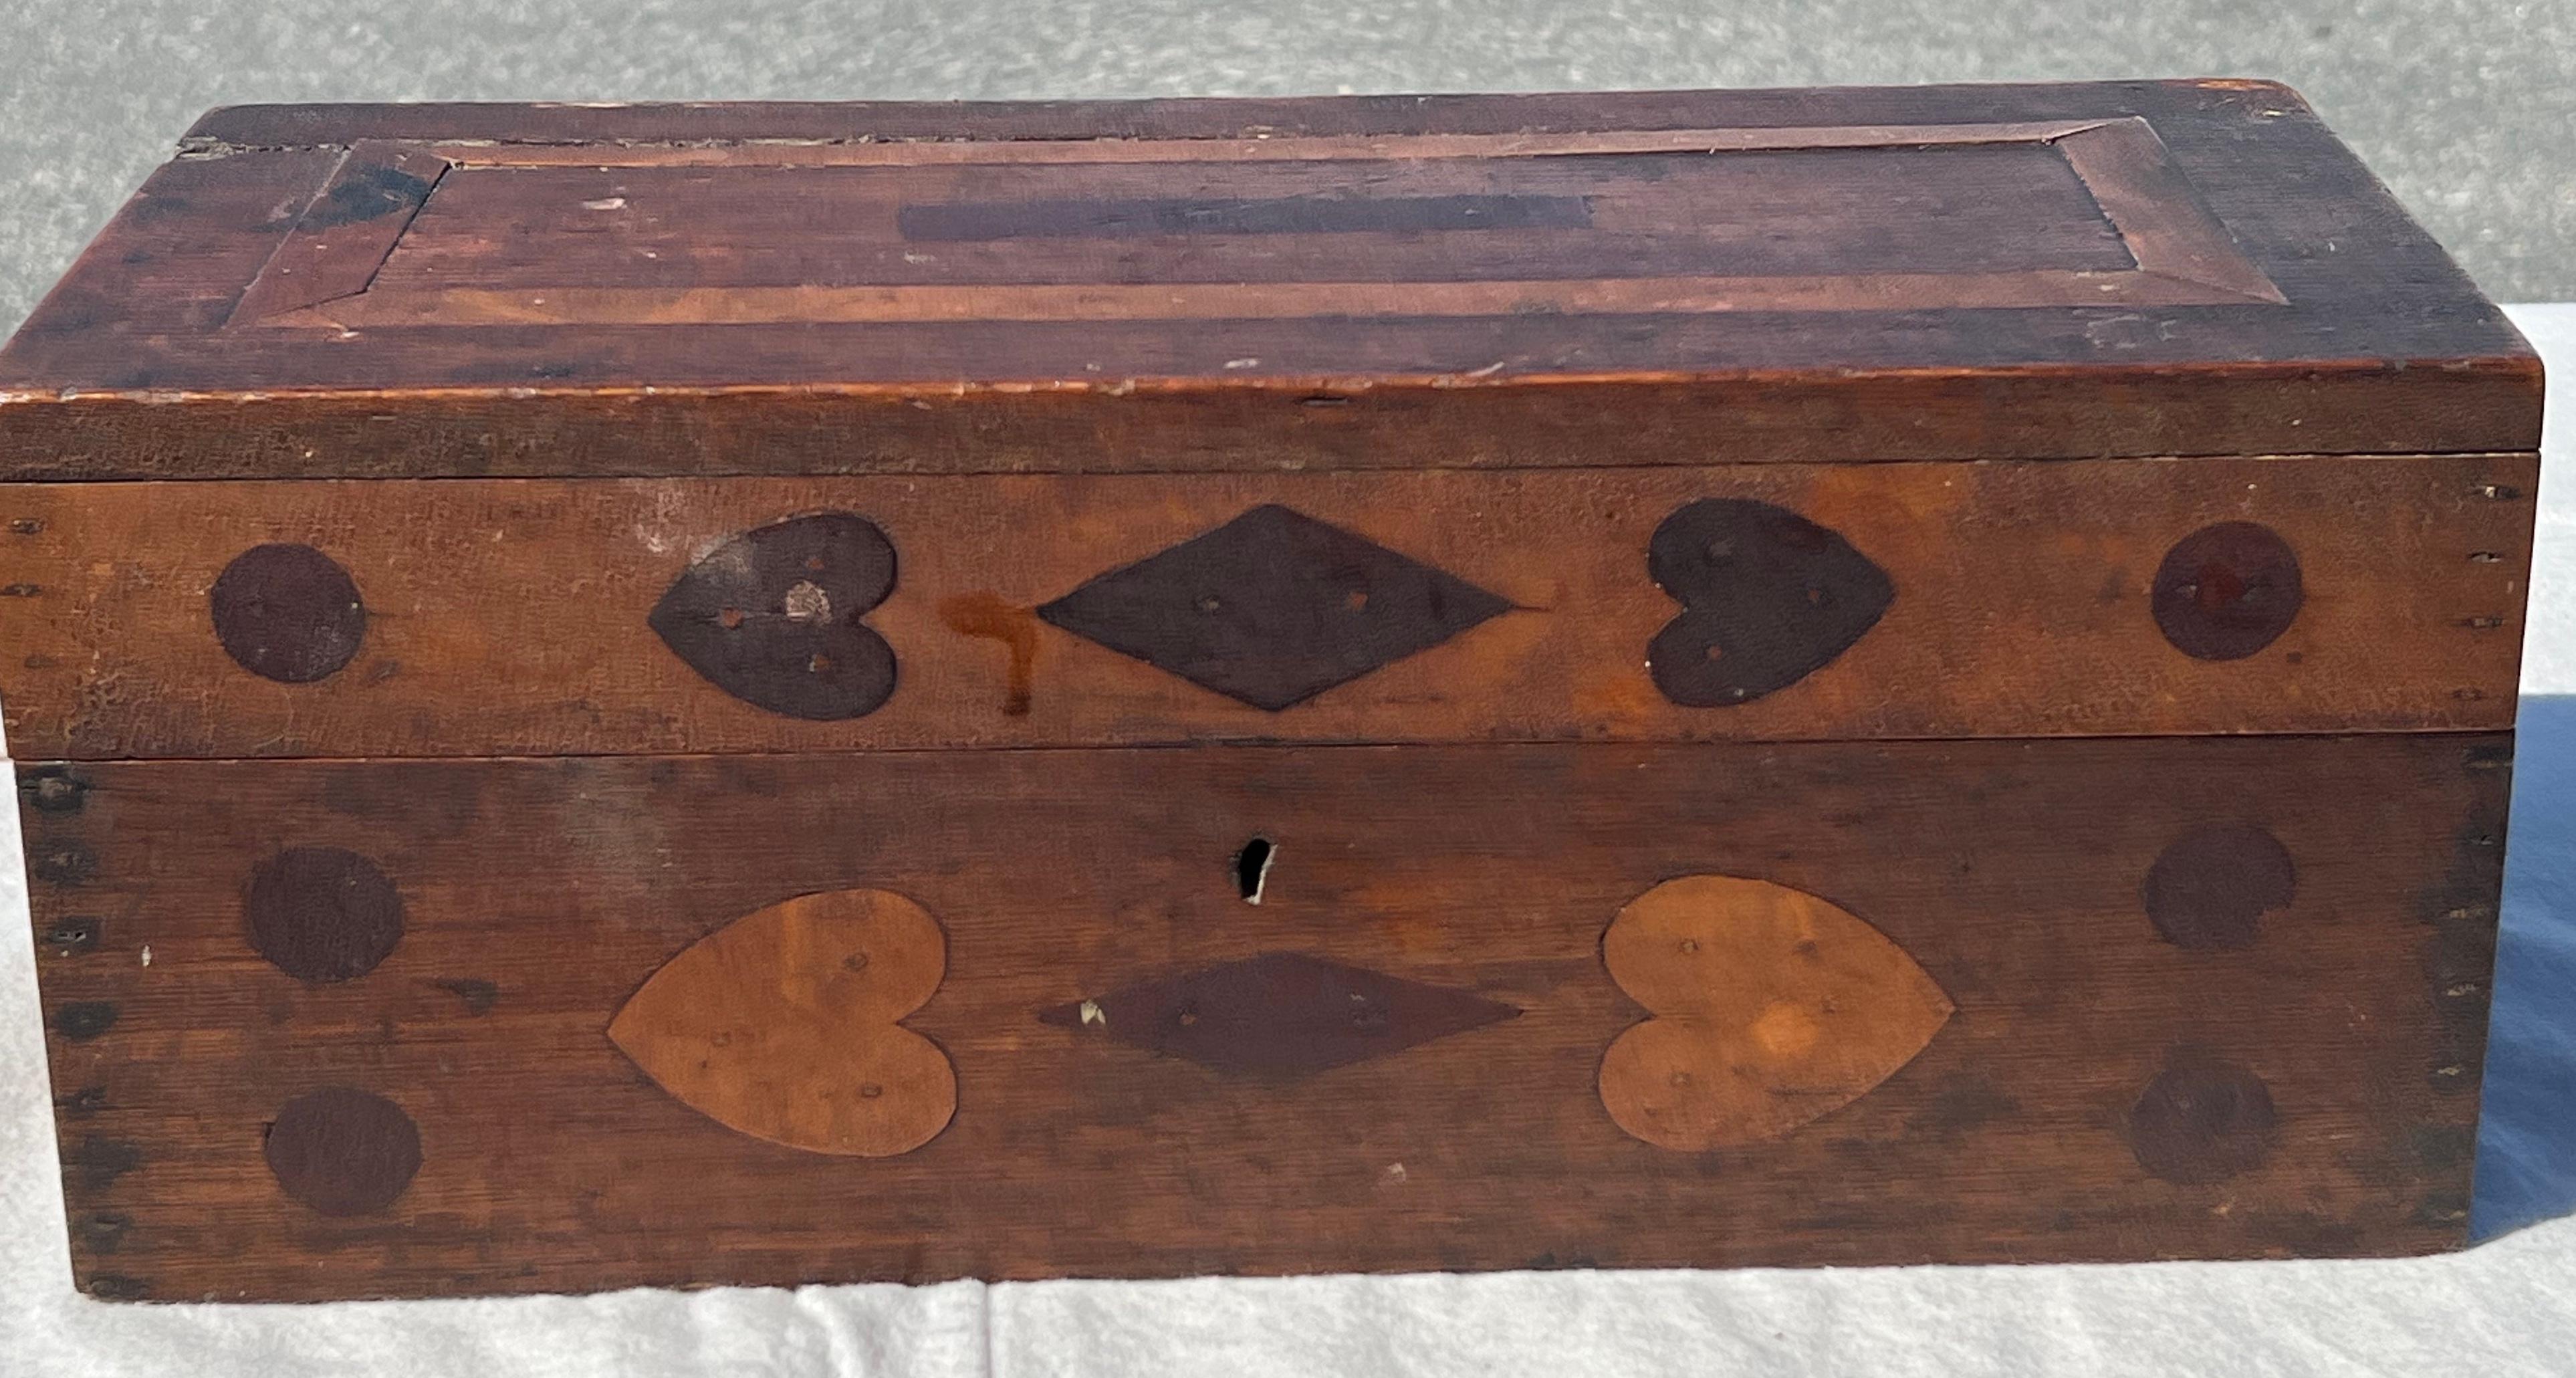 19th Century wooden box with hinged top.  Inlay in various woods throughout with patterns including hearts and diamonds.  Illegible graphite inscription on interior.